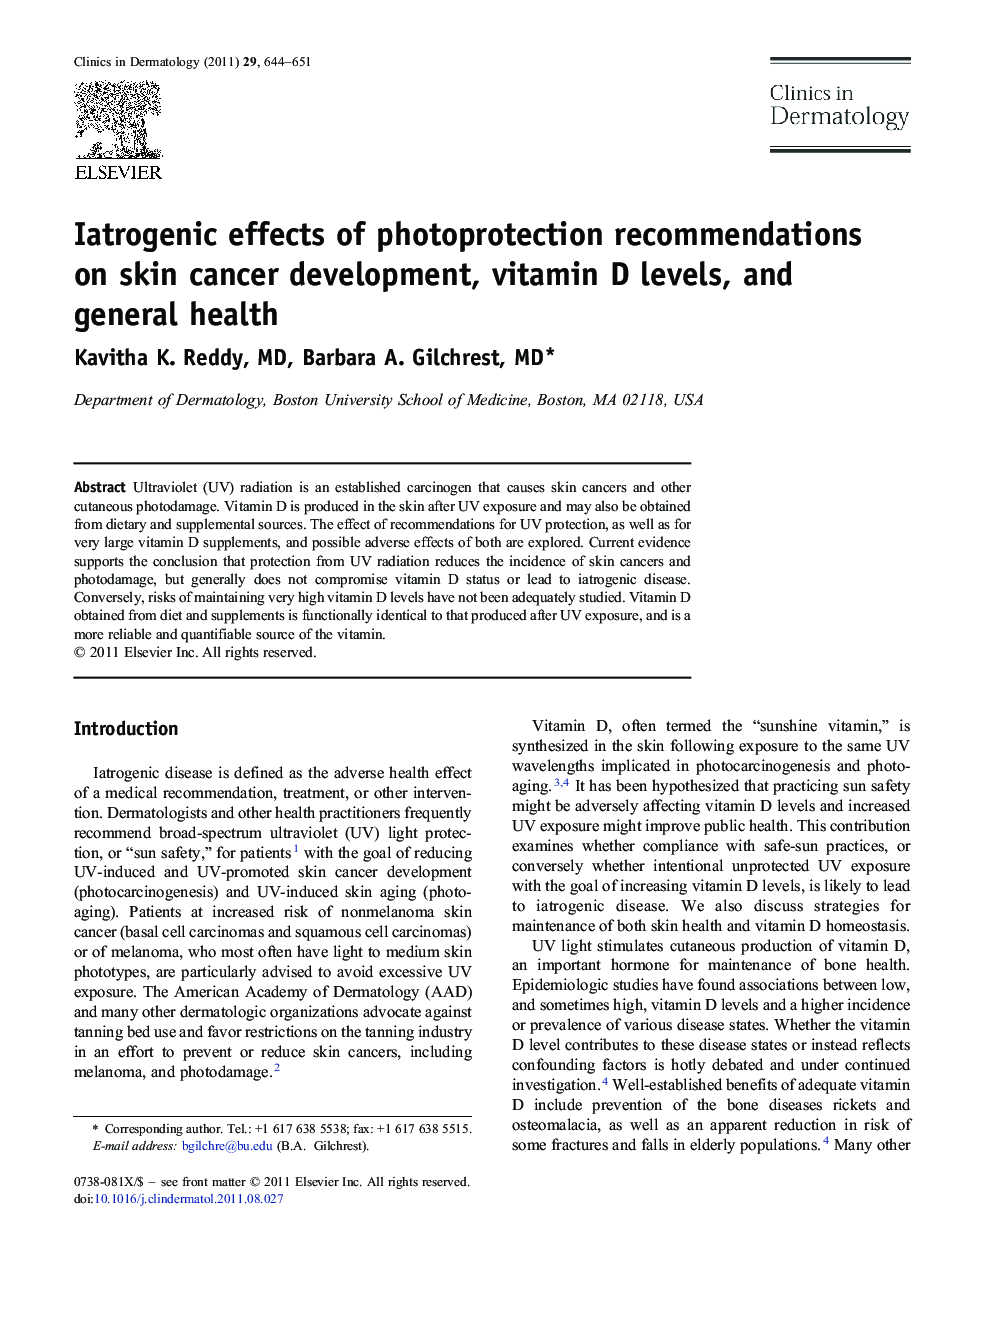 Iatrogenic effects of photoprotection recommendations on skin cancer development, vitamin D levels, and general health